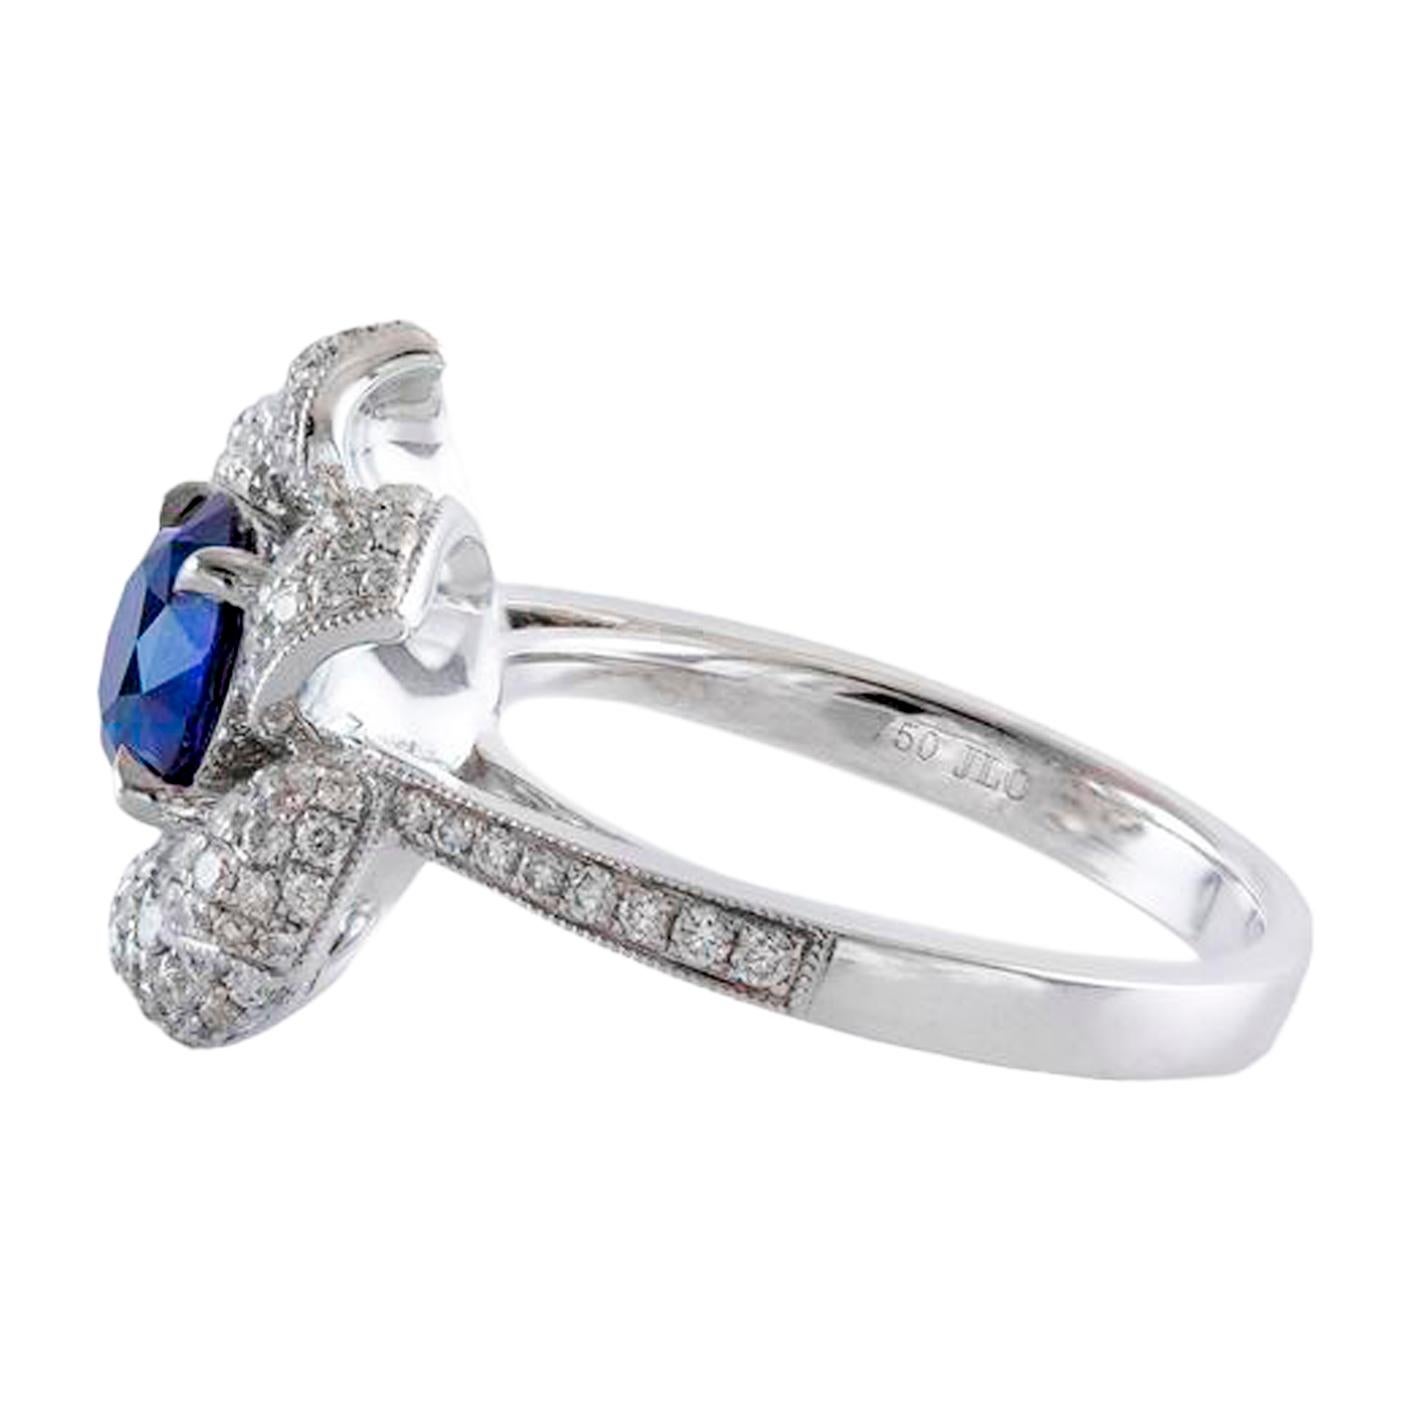 An elegant fashion ring design showcasing a round cut blue sapphire center stone weighing 1.35 carat total, set in a four prong basket. Surrounded by six flower petals encrusted with brilliant round diamonds weighing 0.78 carats, and accenting